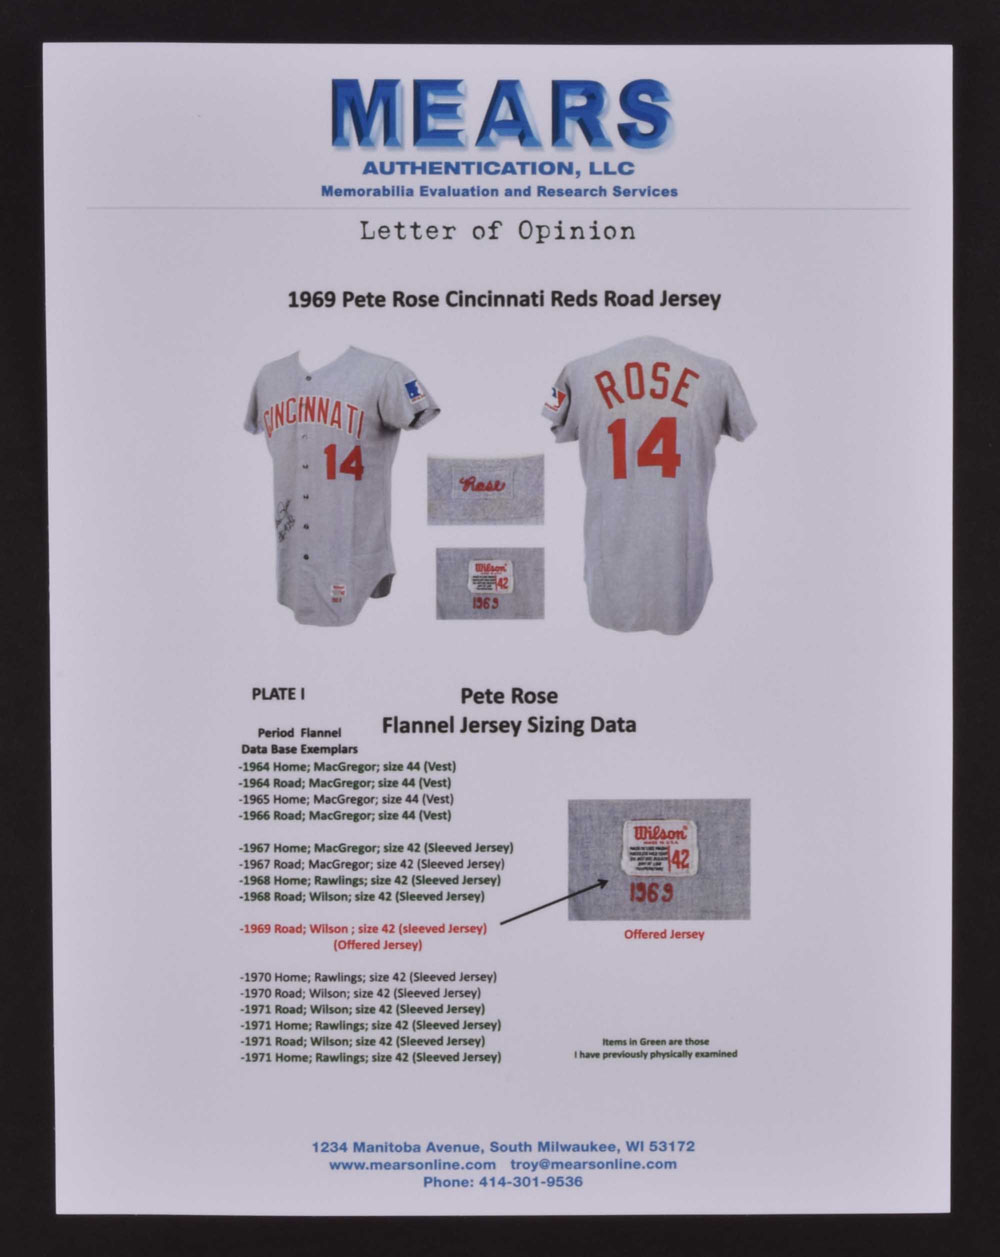 reds jersey history